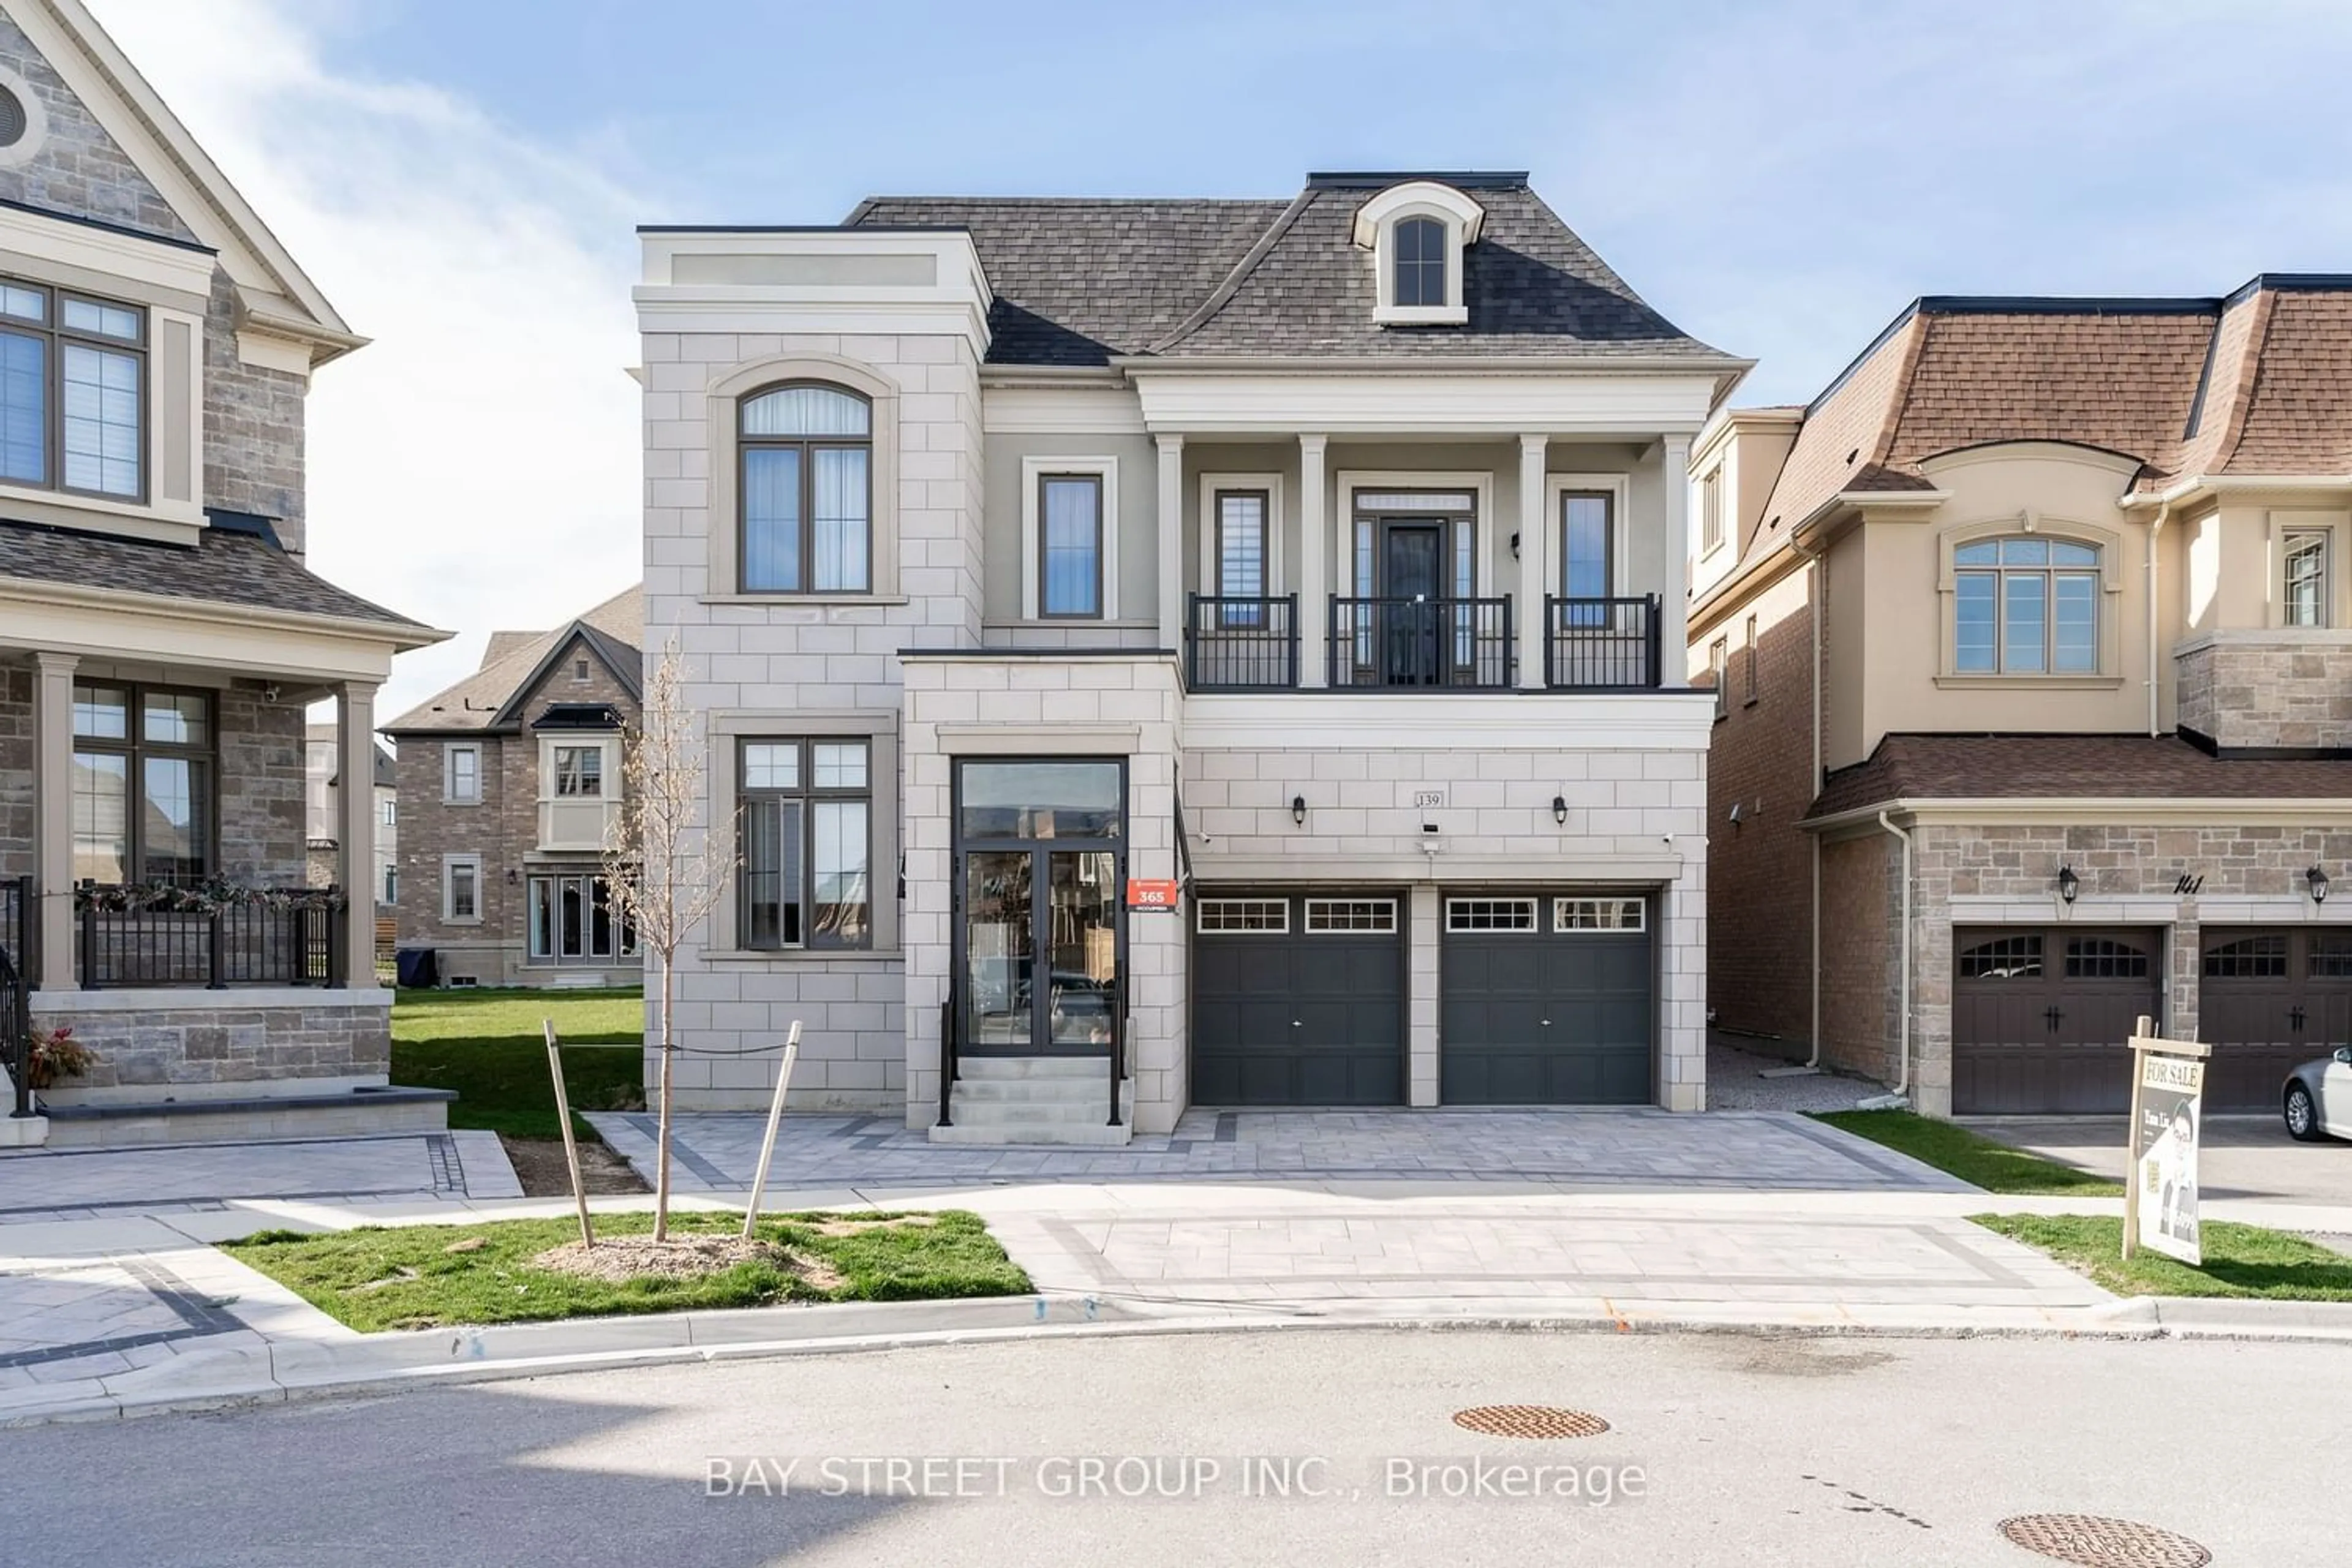 Home with brick exterior material for 139 Milky Way Dr, Richmond Hill Ontario L4C 4L9